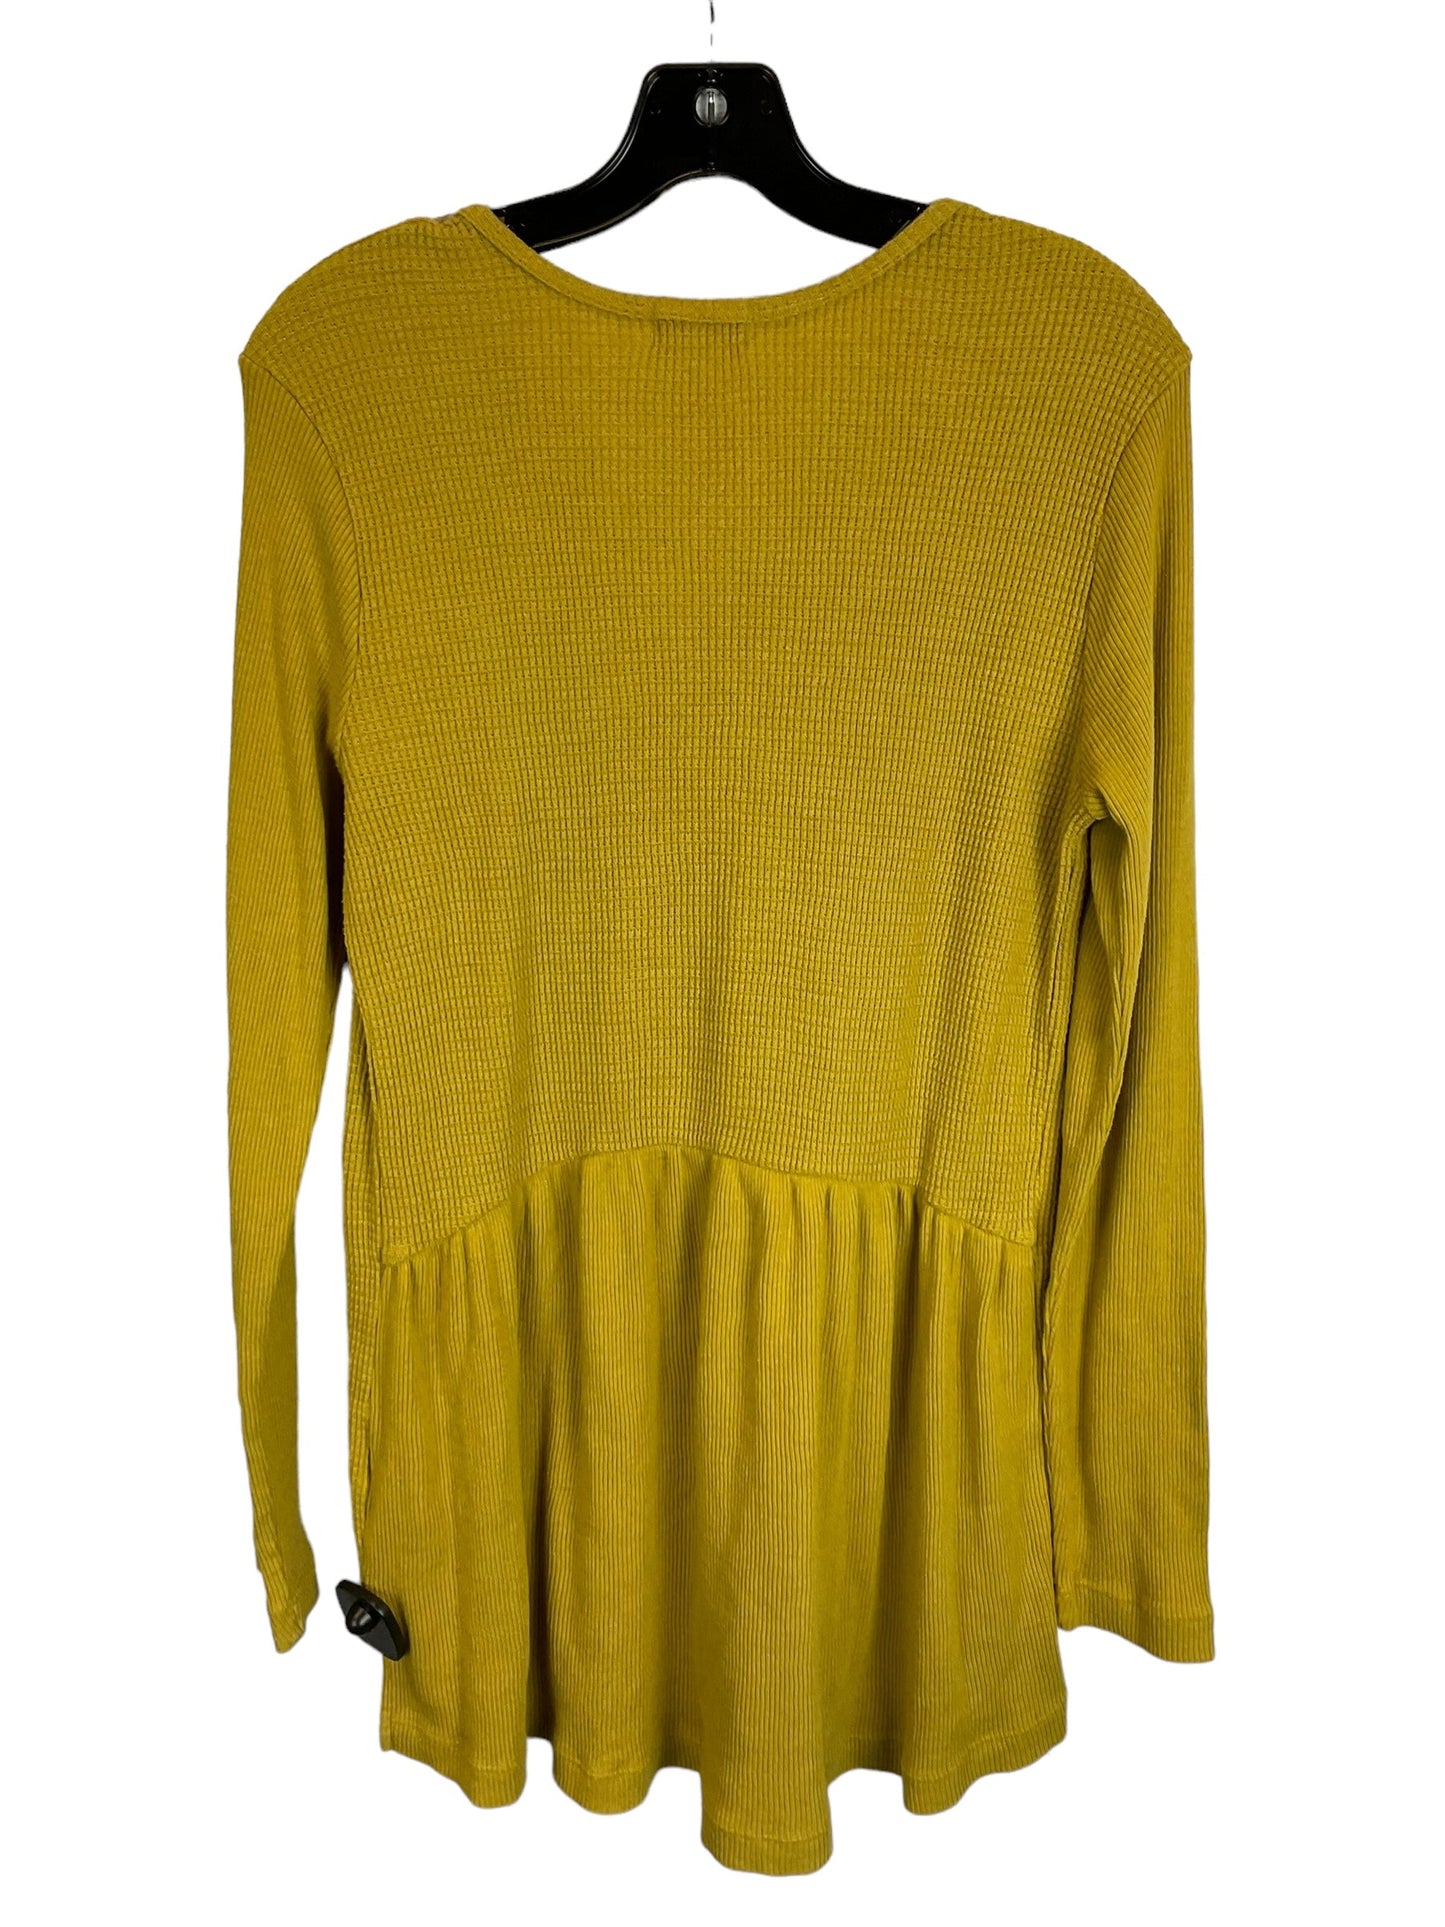 Yellow Top Long Sleeve Free People, Size M